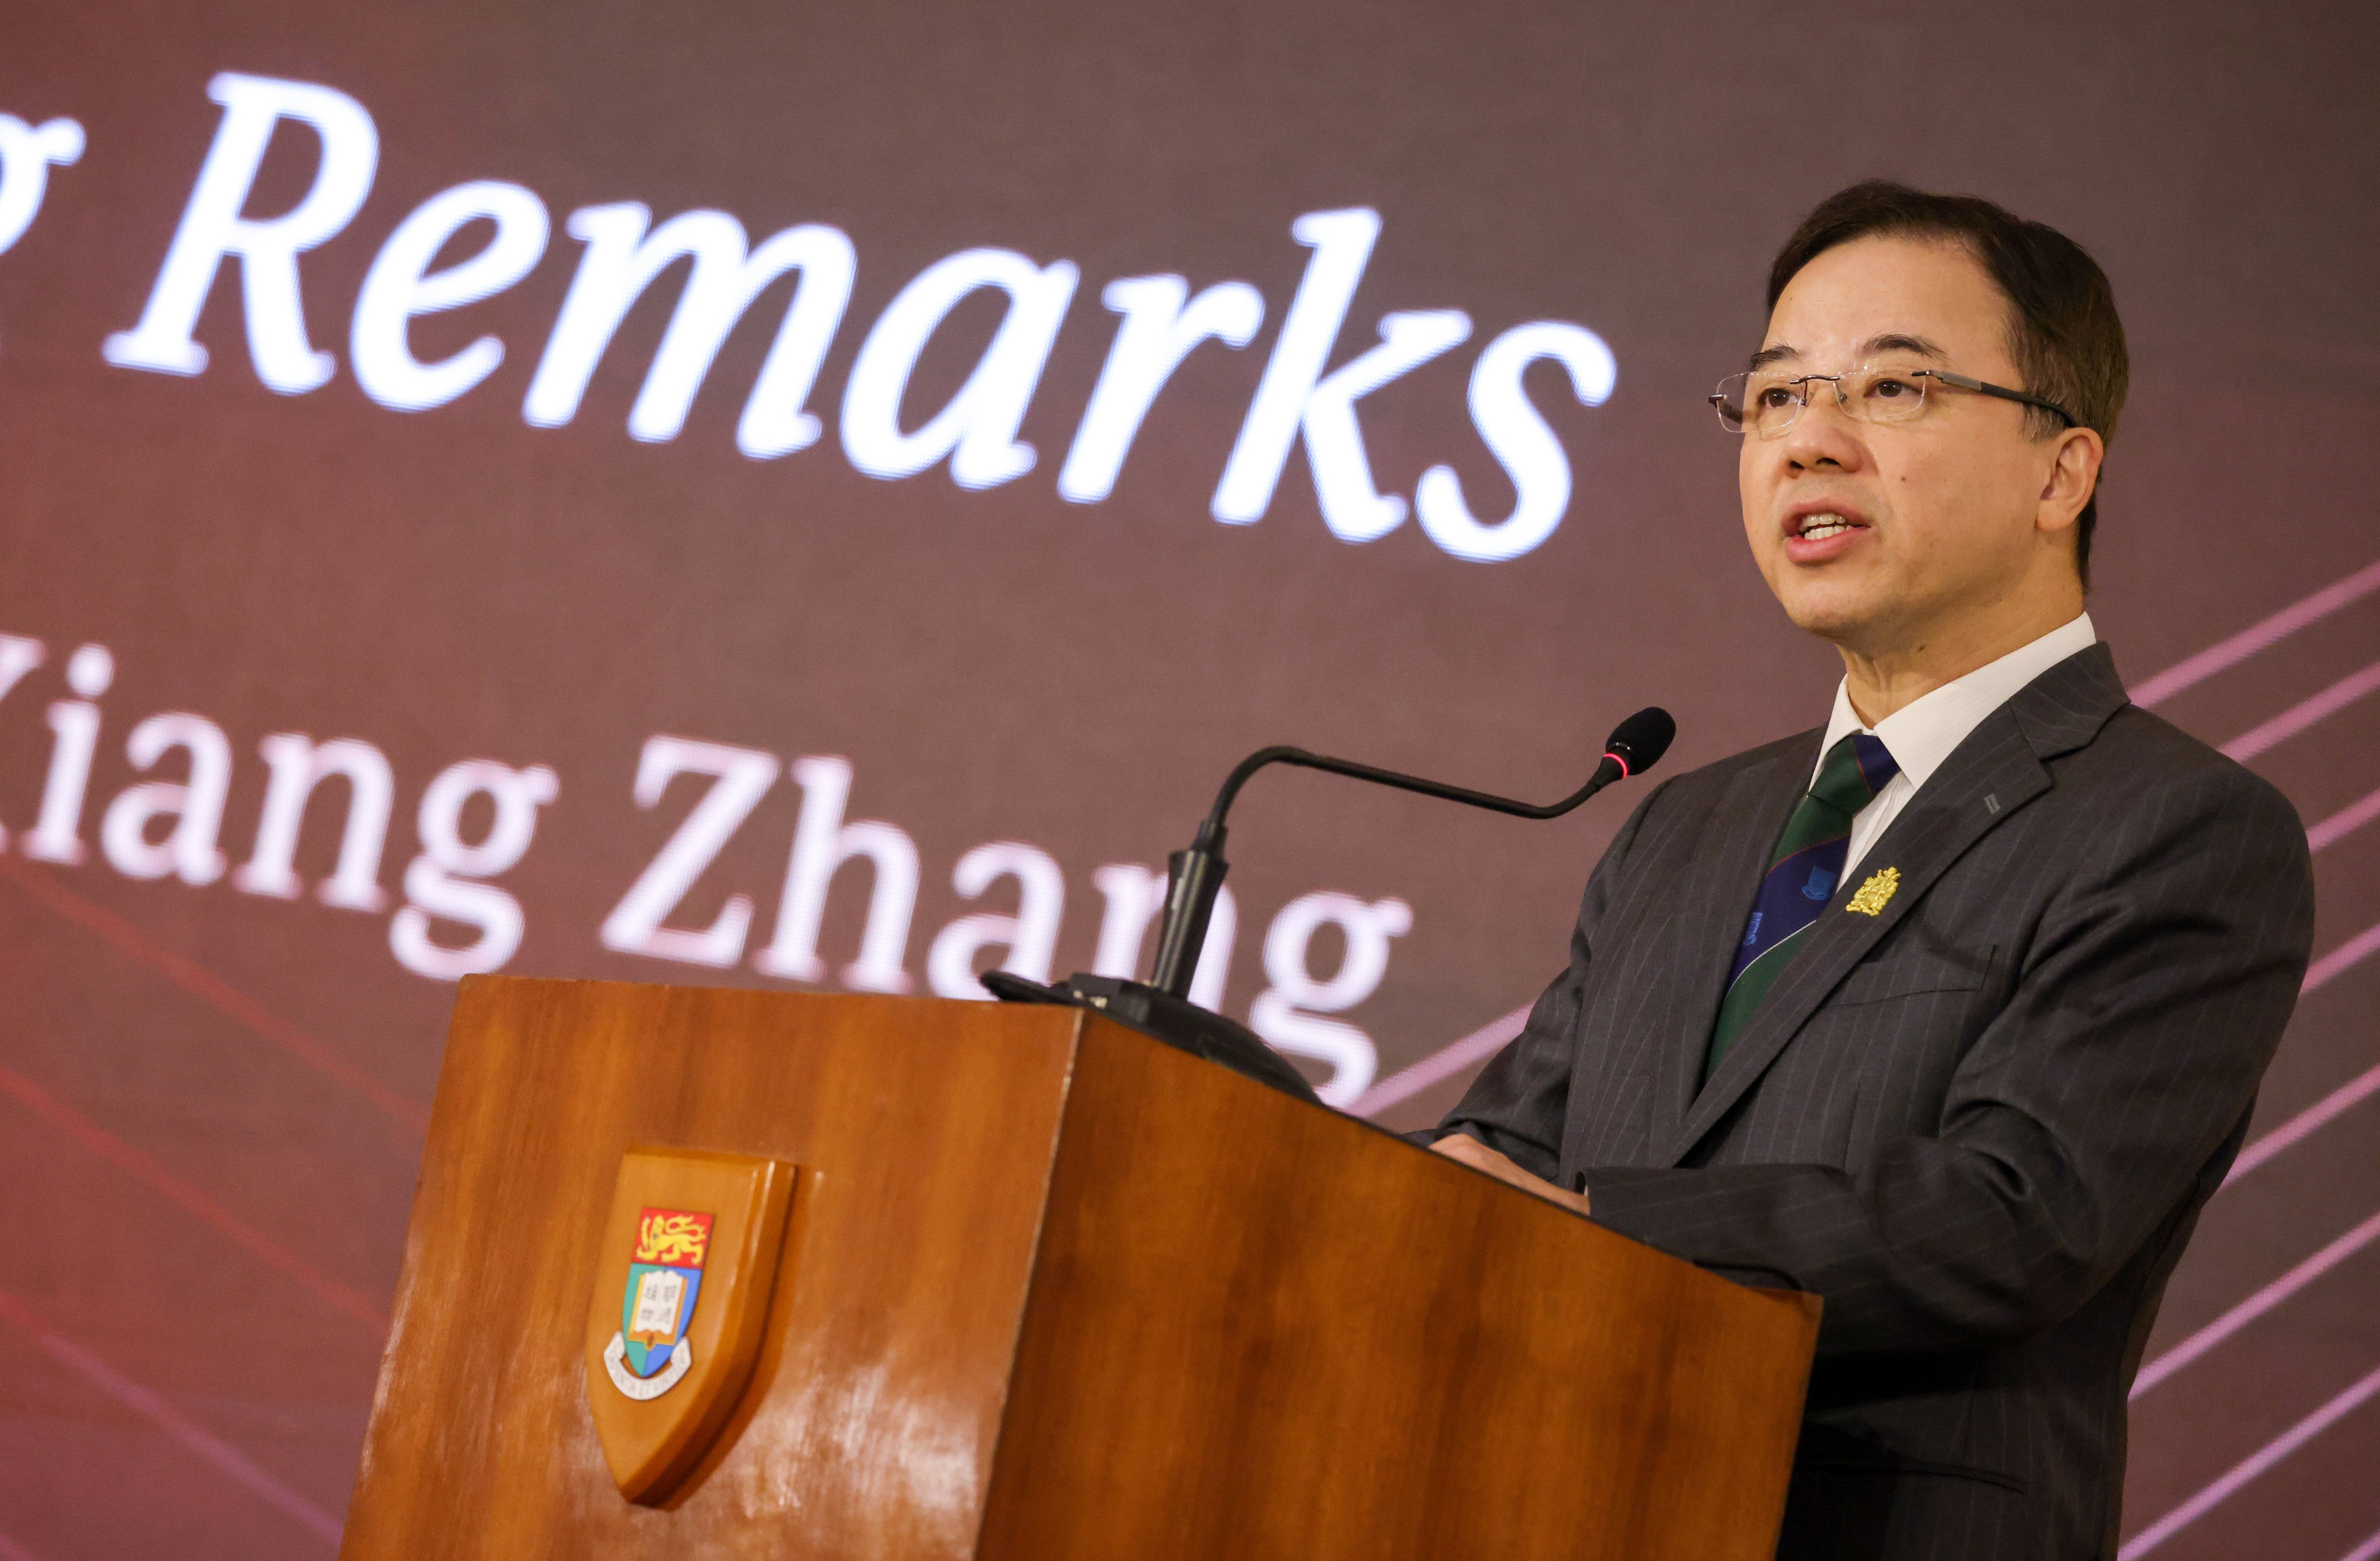 Vice-chancellor Xiang Zhang delivers a talk last year. He says the university should exercise caution when using an anonymous whistle-blower reporting system. Photo: May Tse